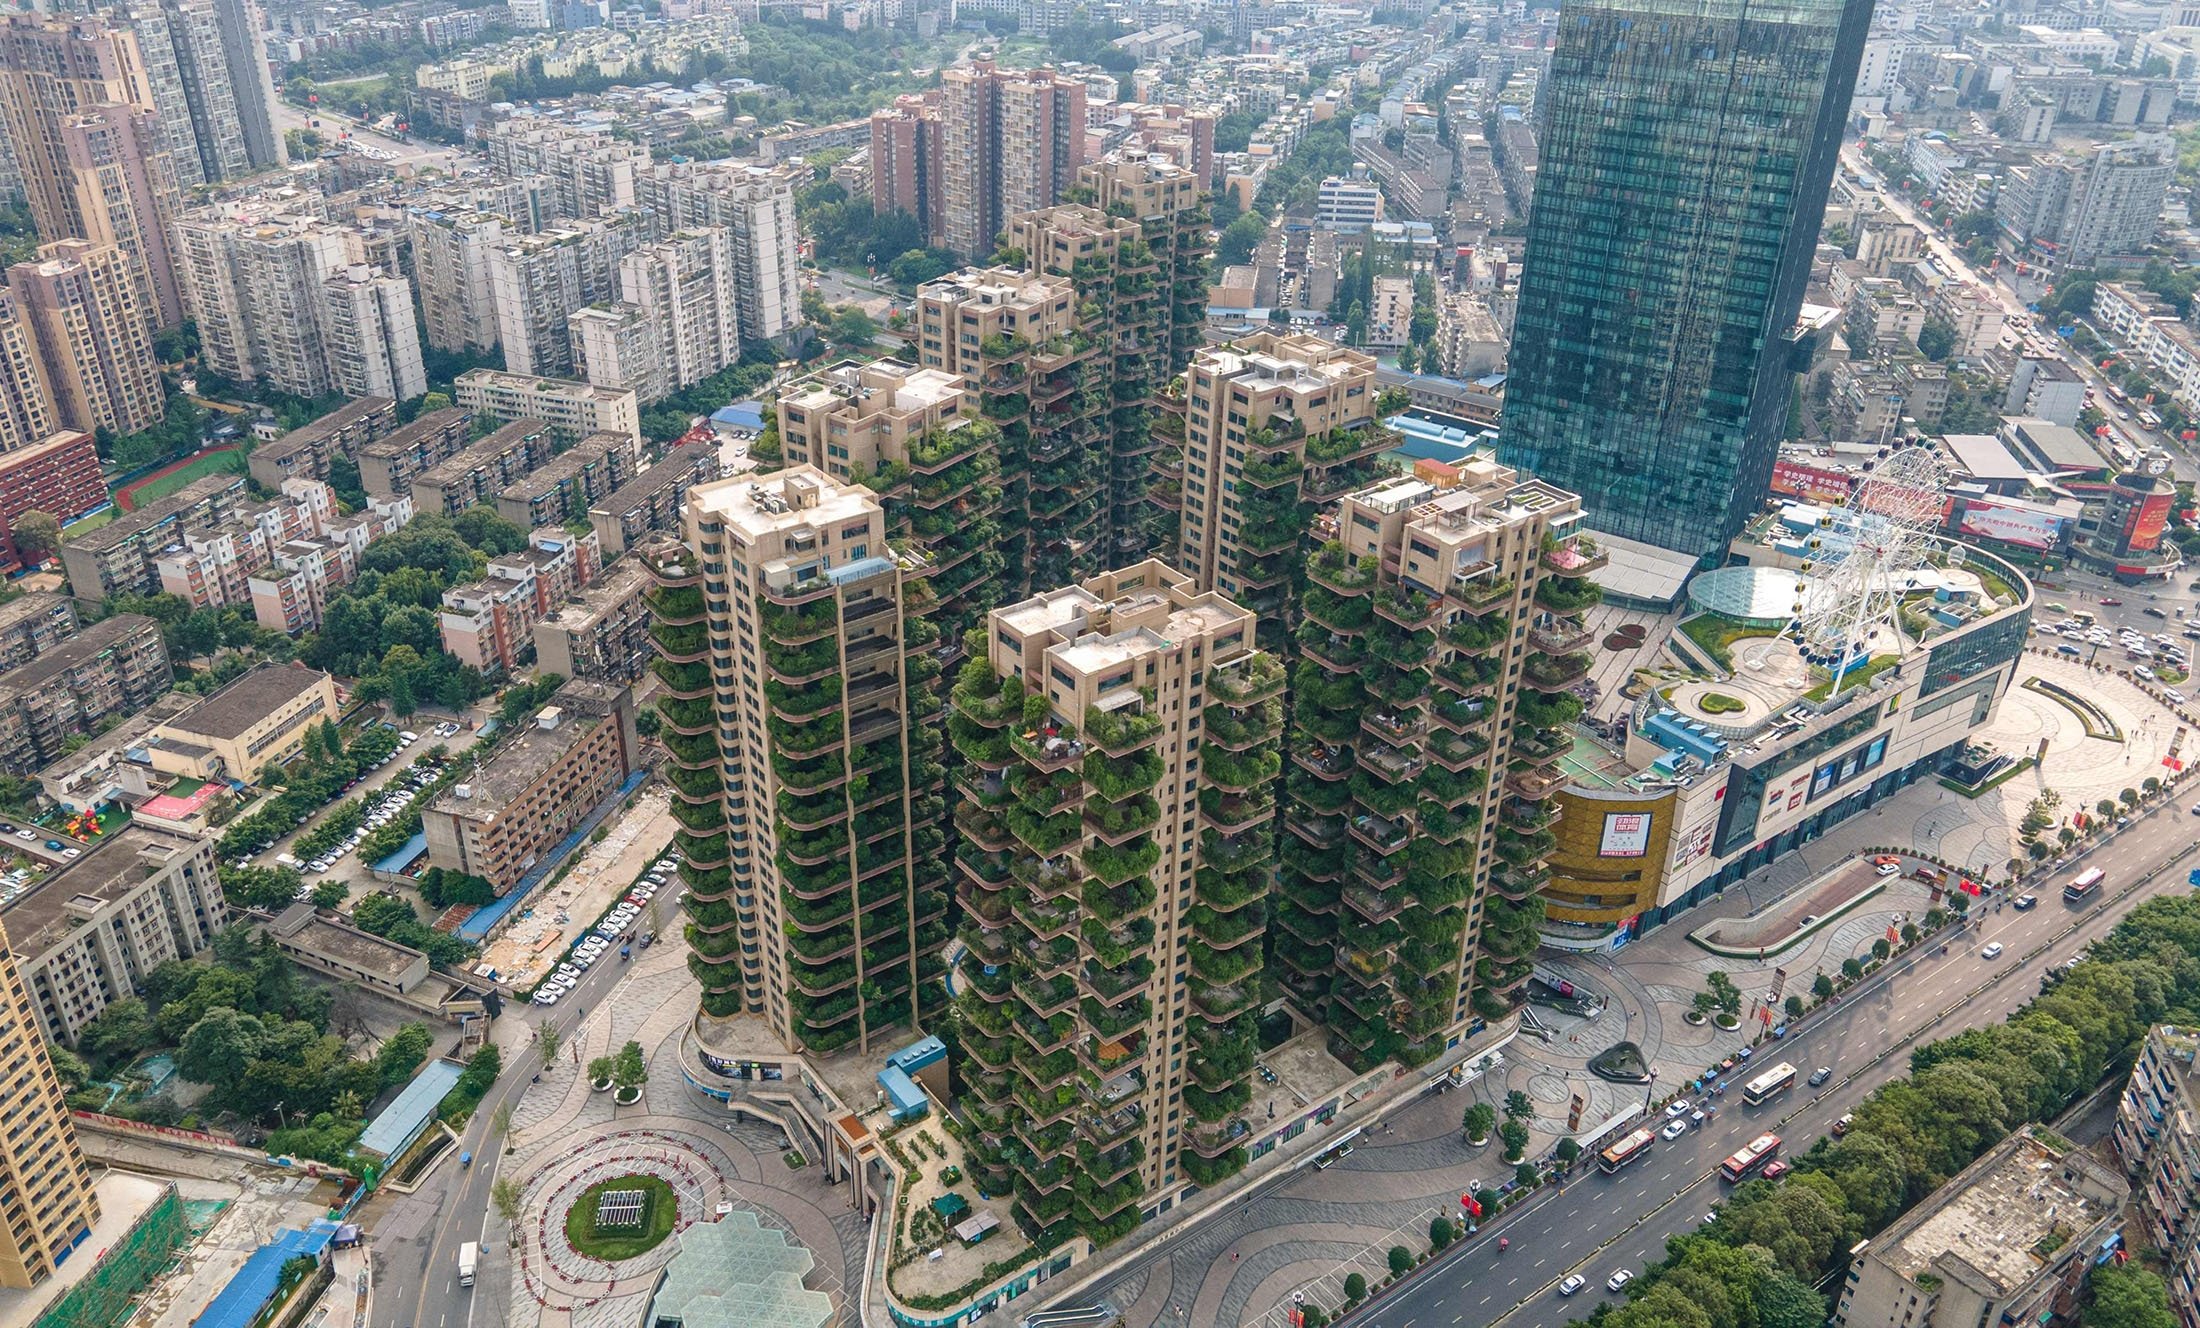 Apartment blocks with balconies covered with plants at a residential community can be seen in Chengdu in China